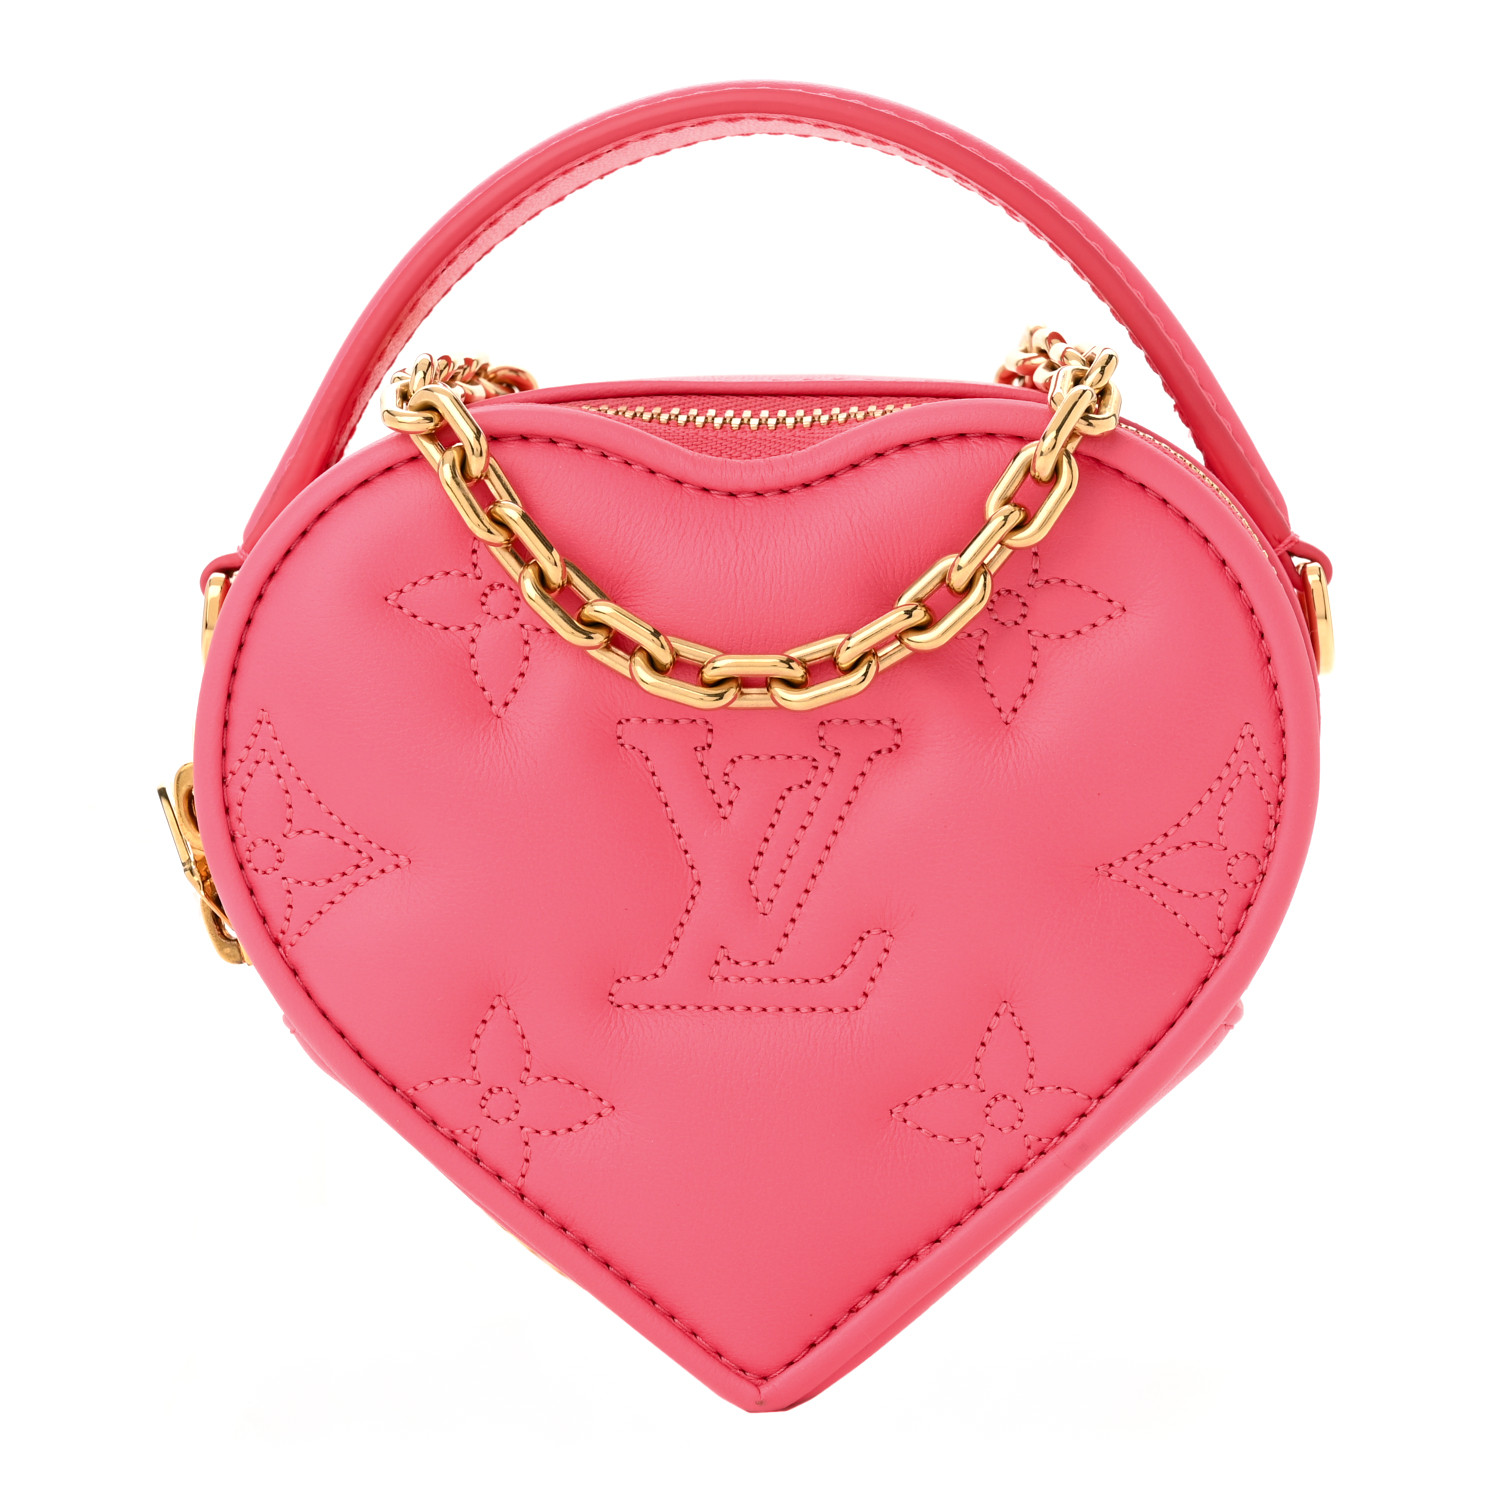 image of LOUIS VUITTON Calfskin Embroidered Monogram Pop My Heart Bag Pouch in the color Dragon Fruit Pink by FASHIONPHILE